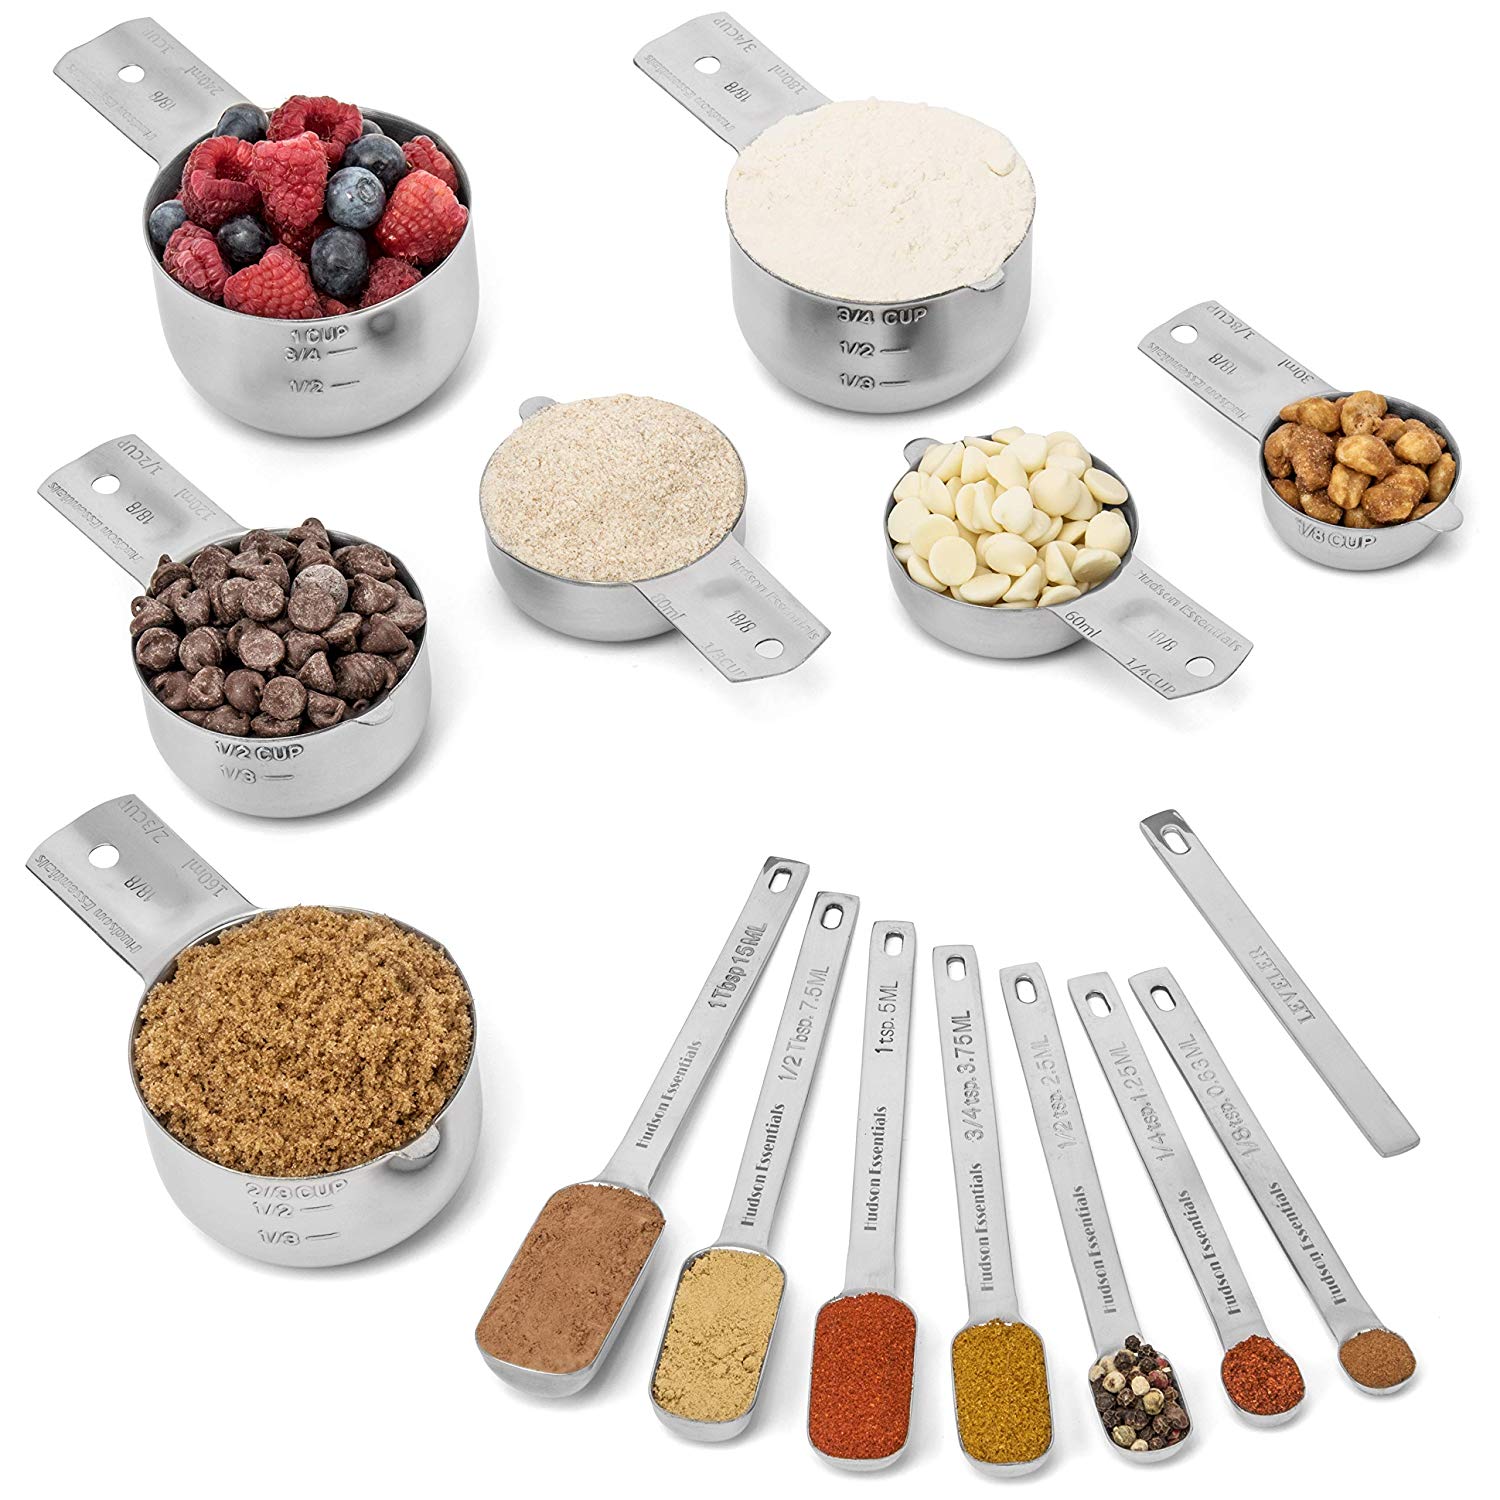 Stainless Steel Measuring Cups Set - 6 pcs - Hudson Essentials